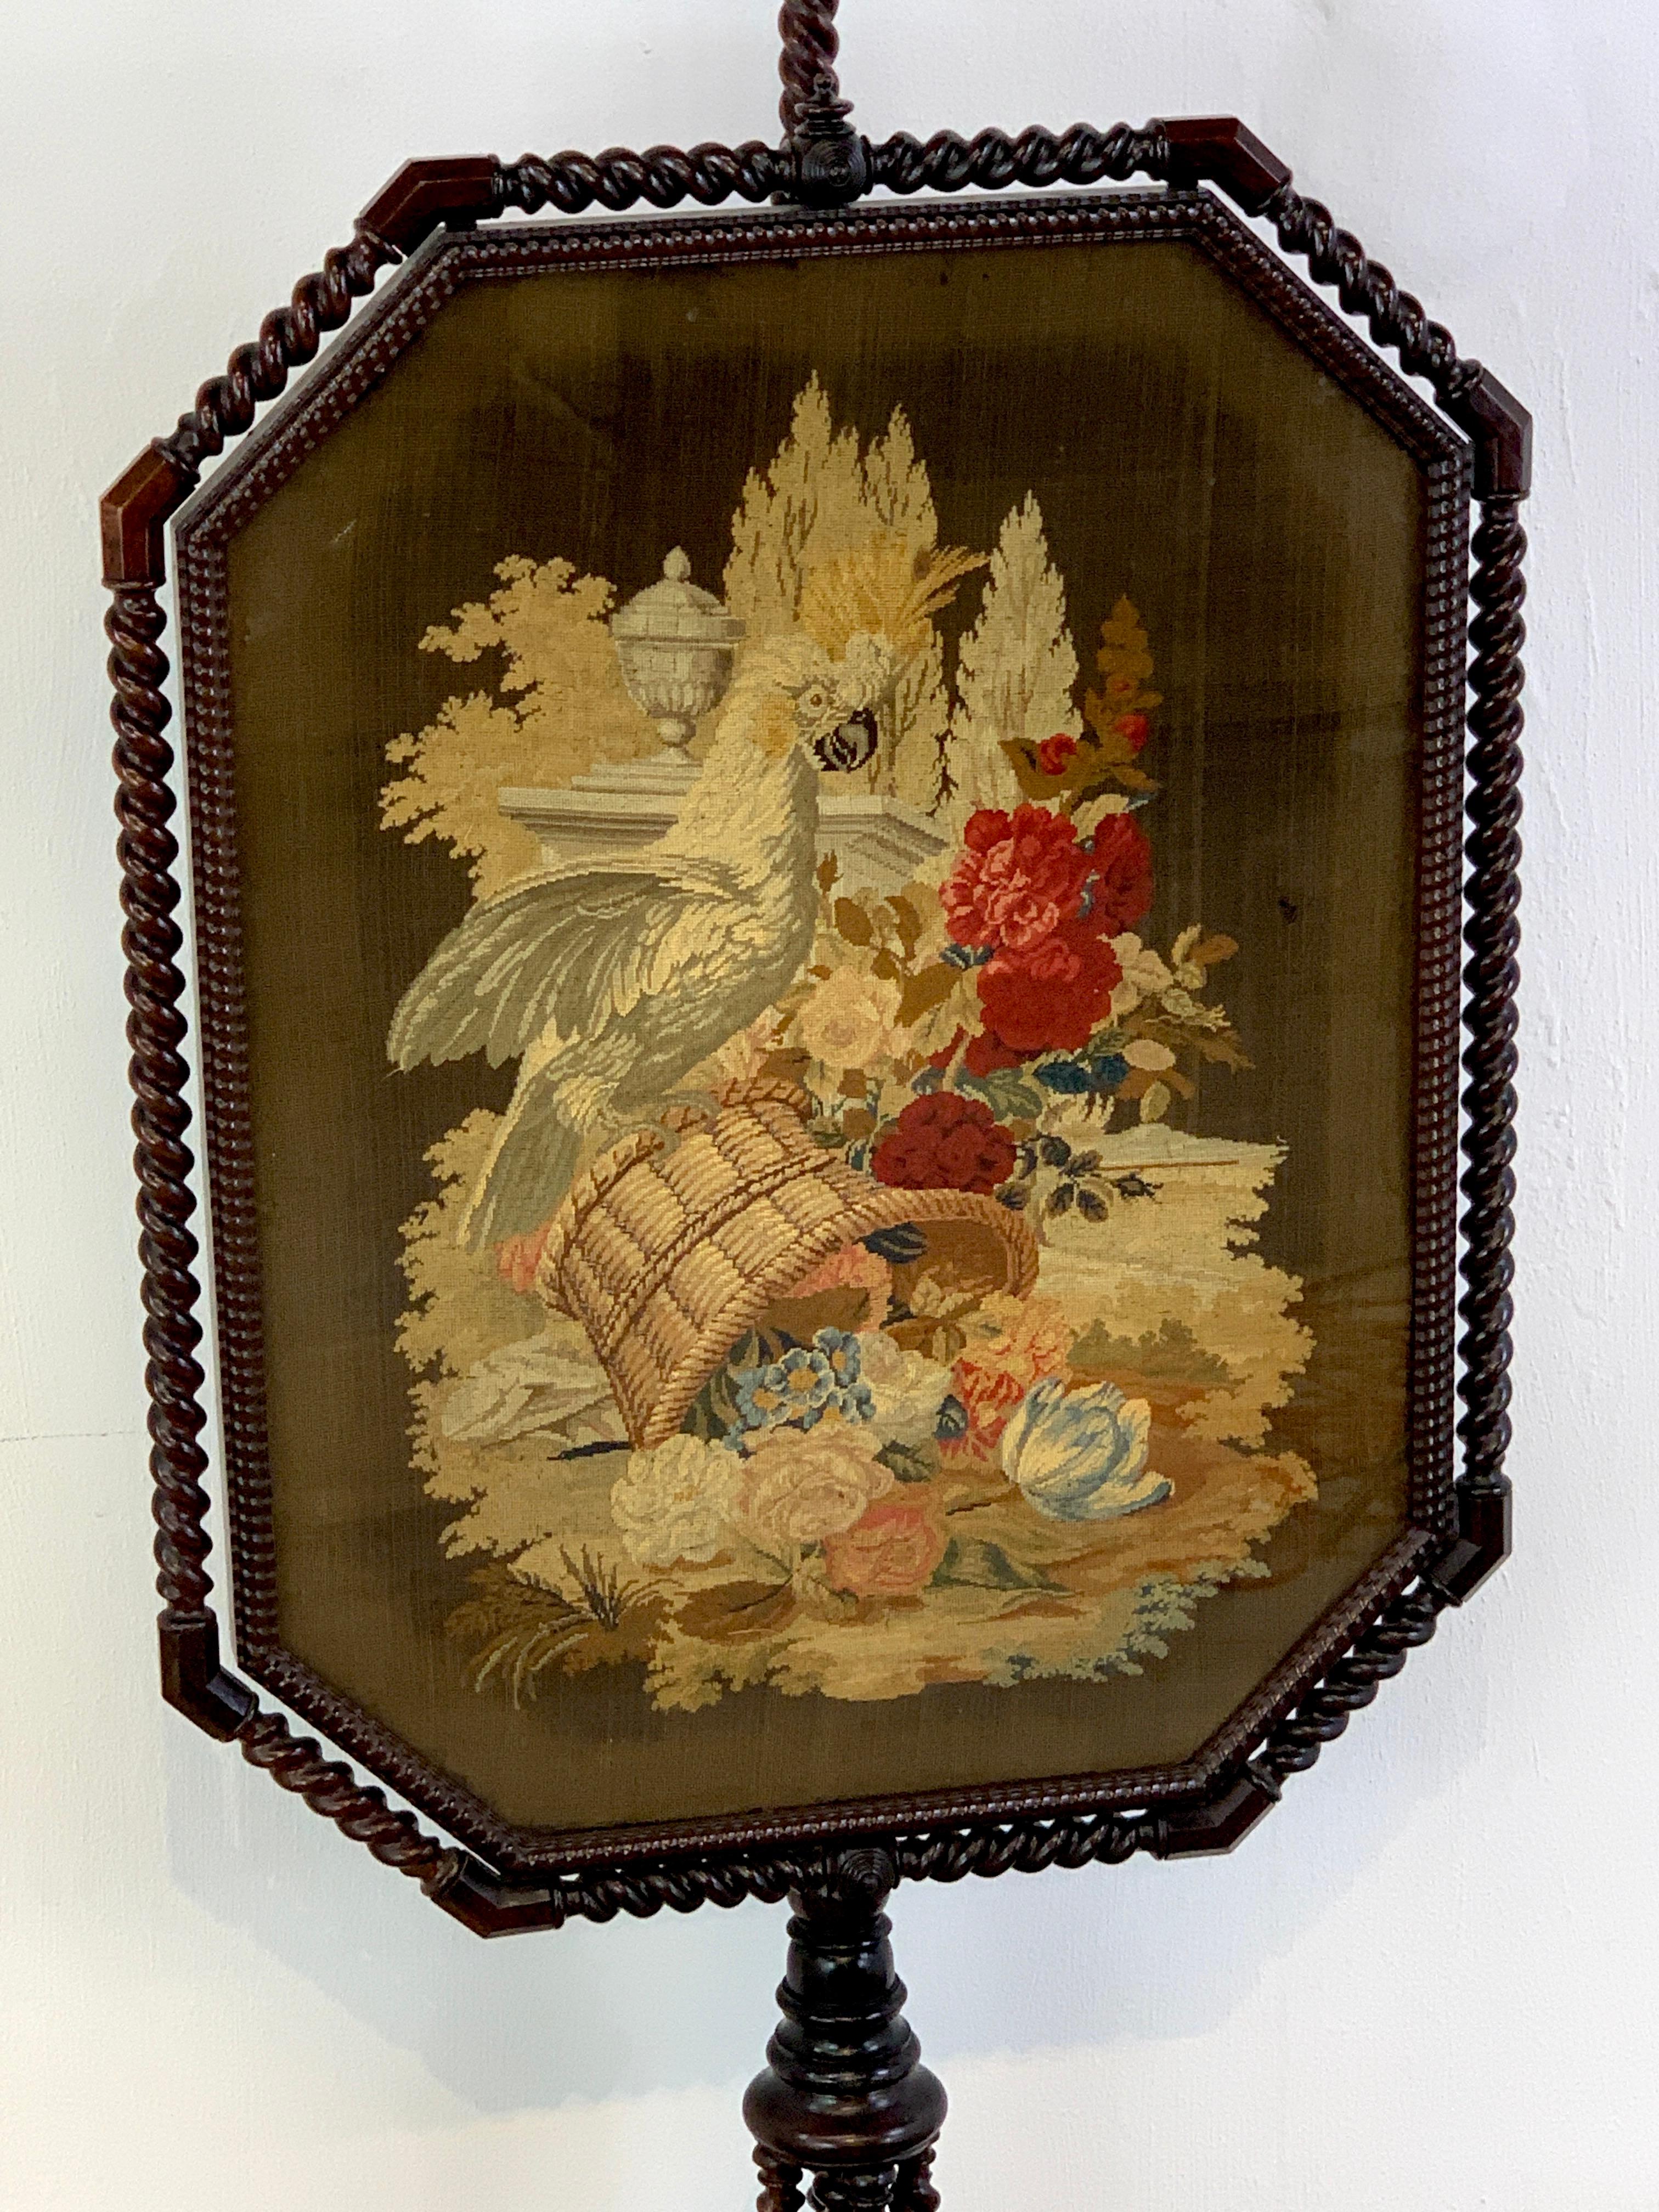 High Victorian Exquisite 19th Century Rosewood & Needlepoint Cockatoo in Landscape Firescreen For Sale